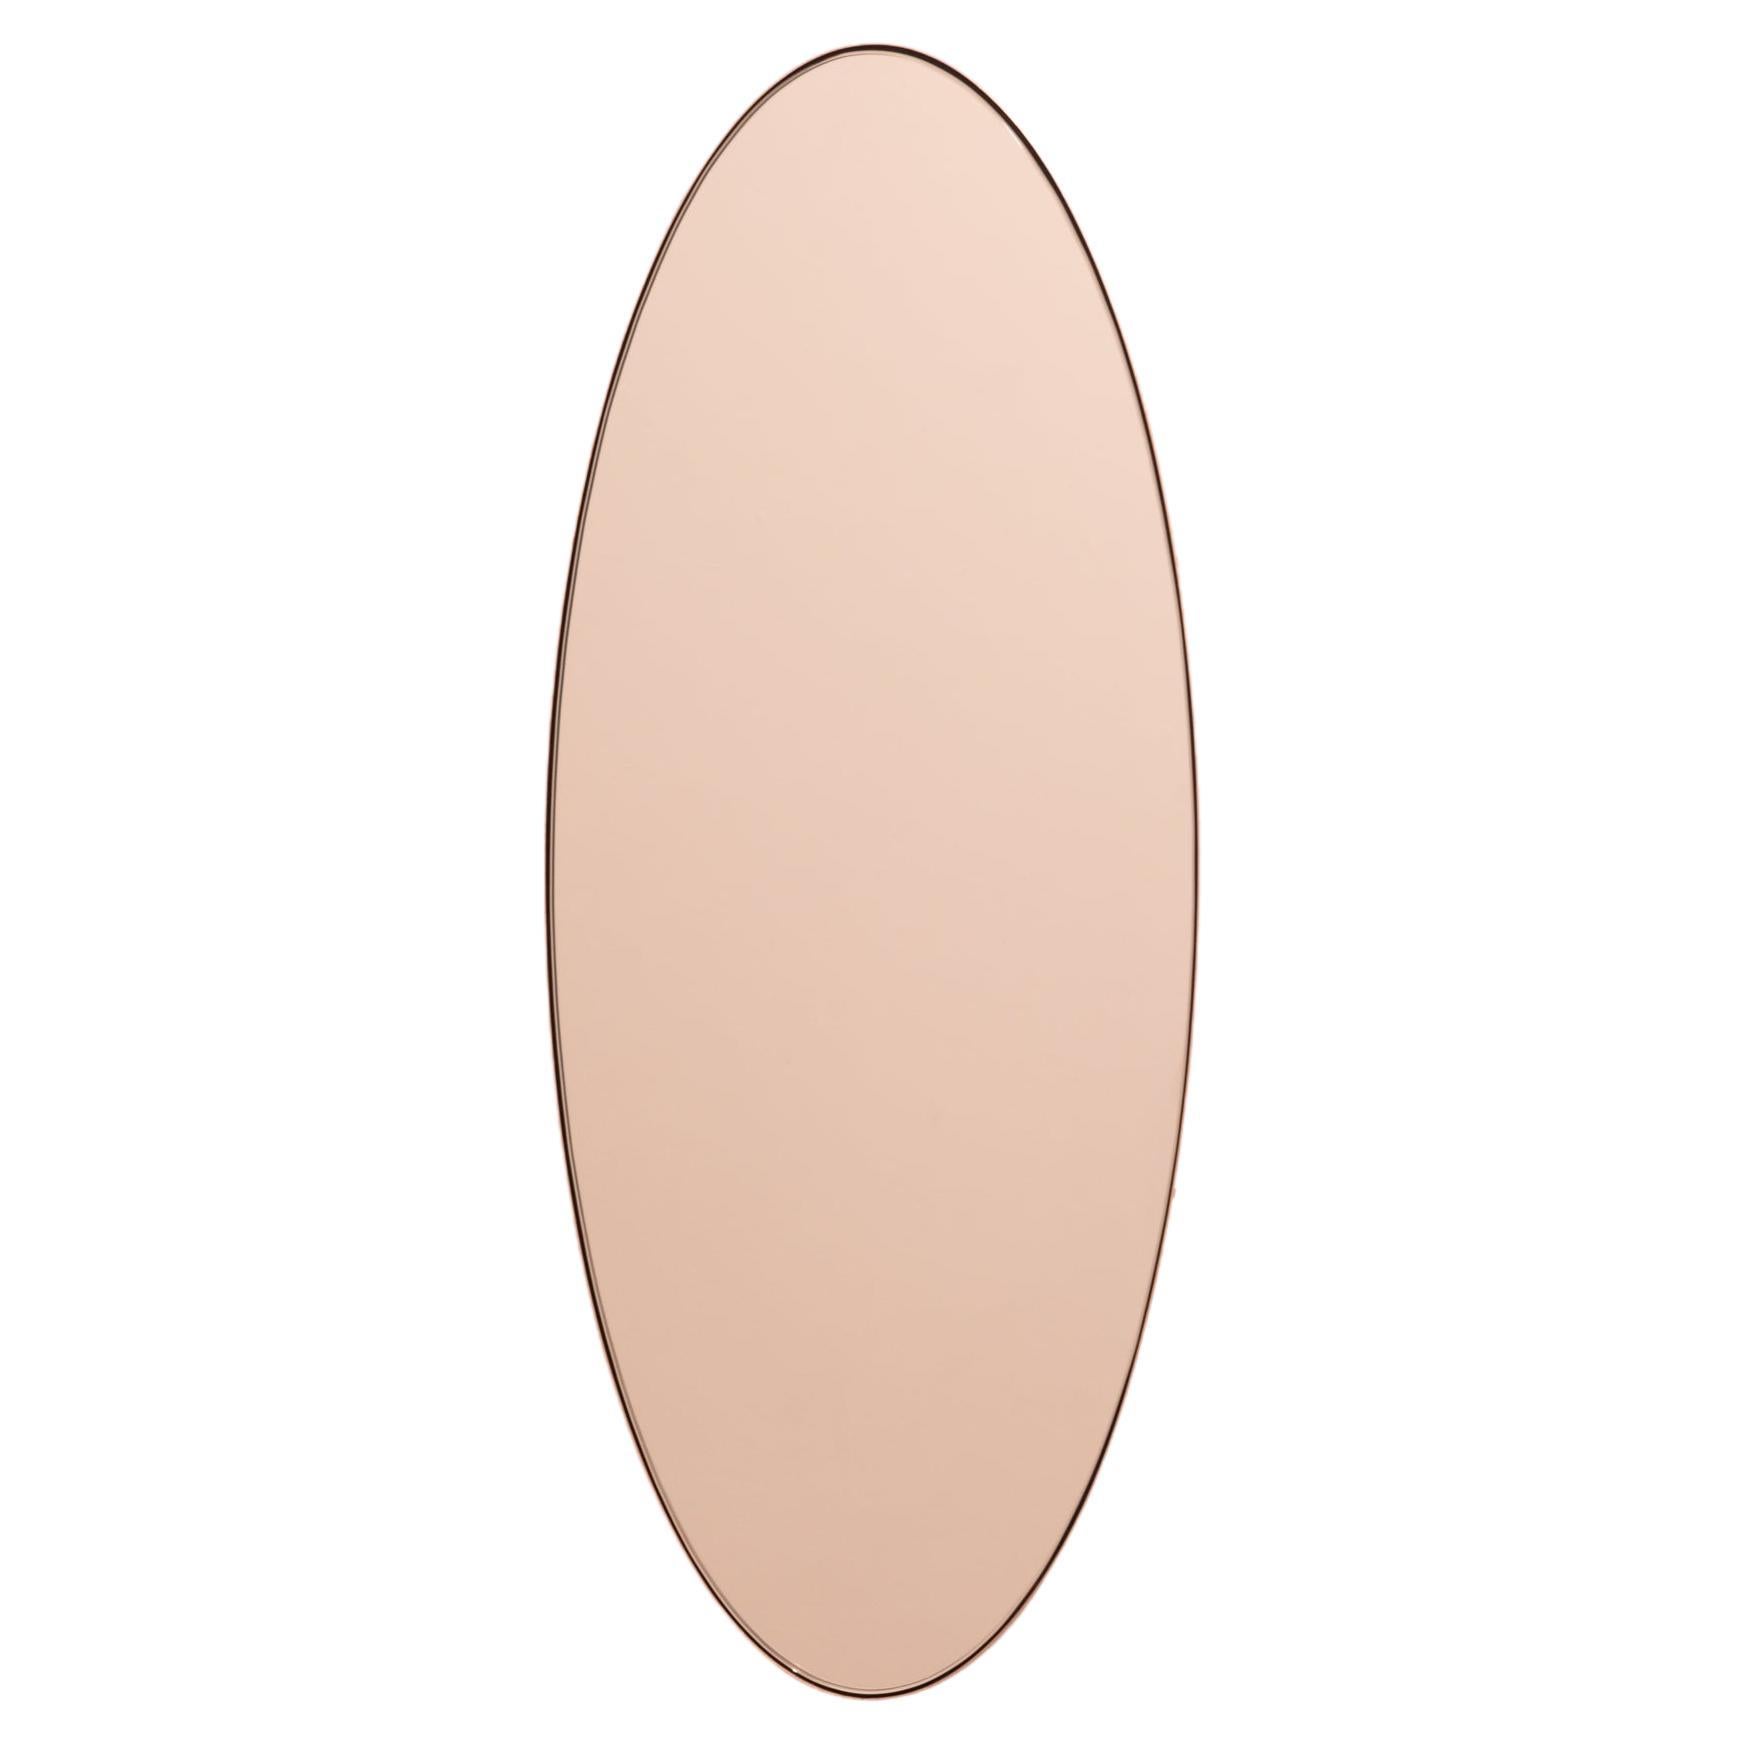 Ovalis Oval shaped Modern Rose Gold Mirror with a Copper Frame, XL For Sale